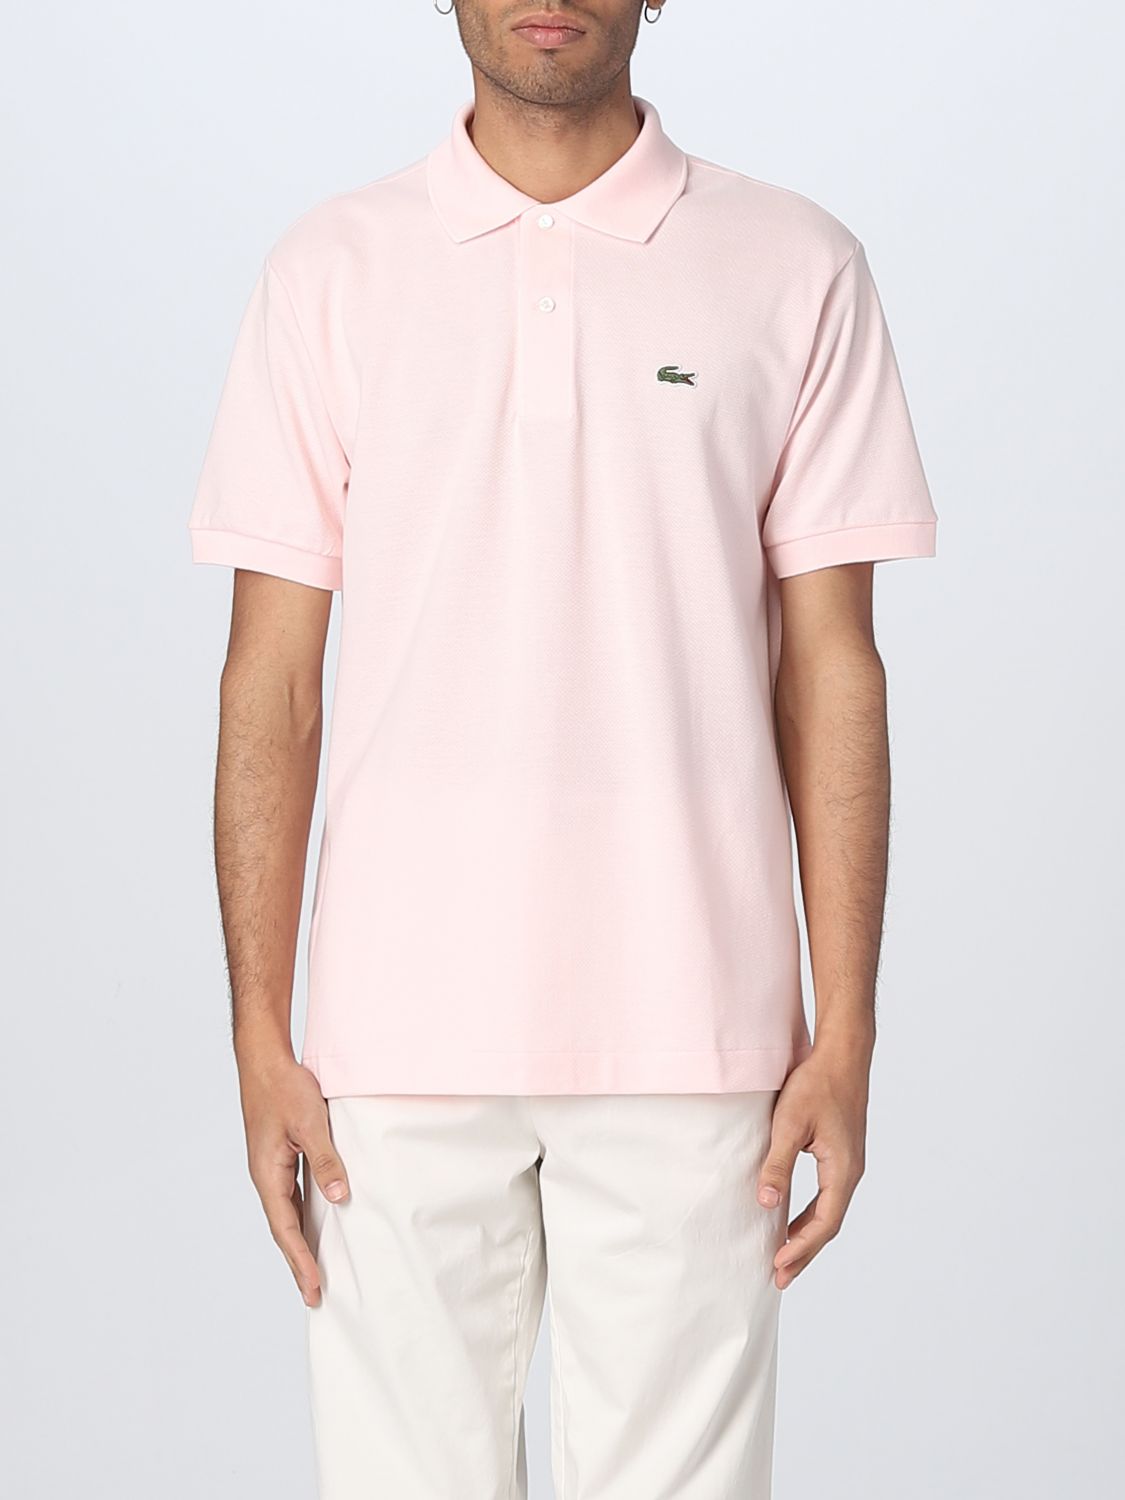 voorzichtig blad kreupel LACOSTE: polo shirt for man - Pink | Lacoste polo shirt L1212 online on  GIGLIO.COM